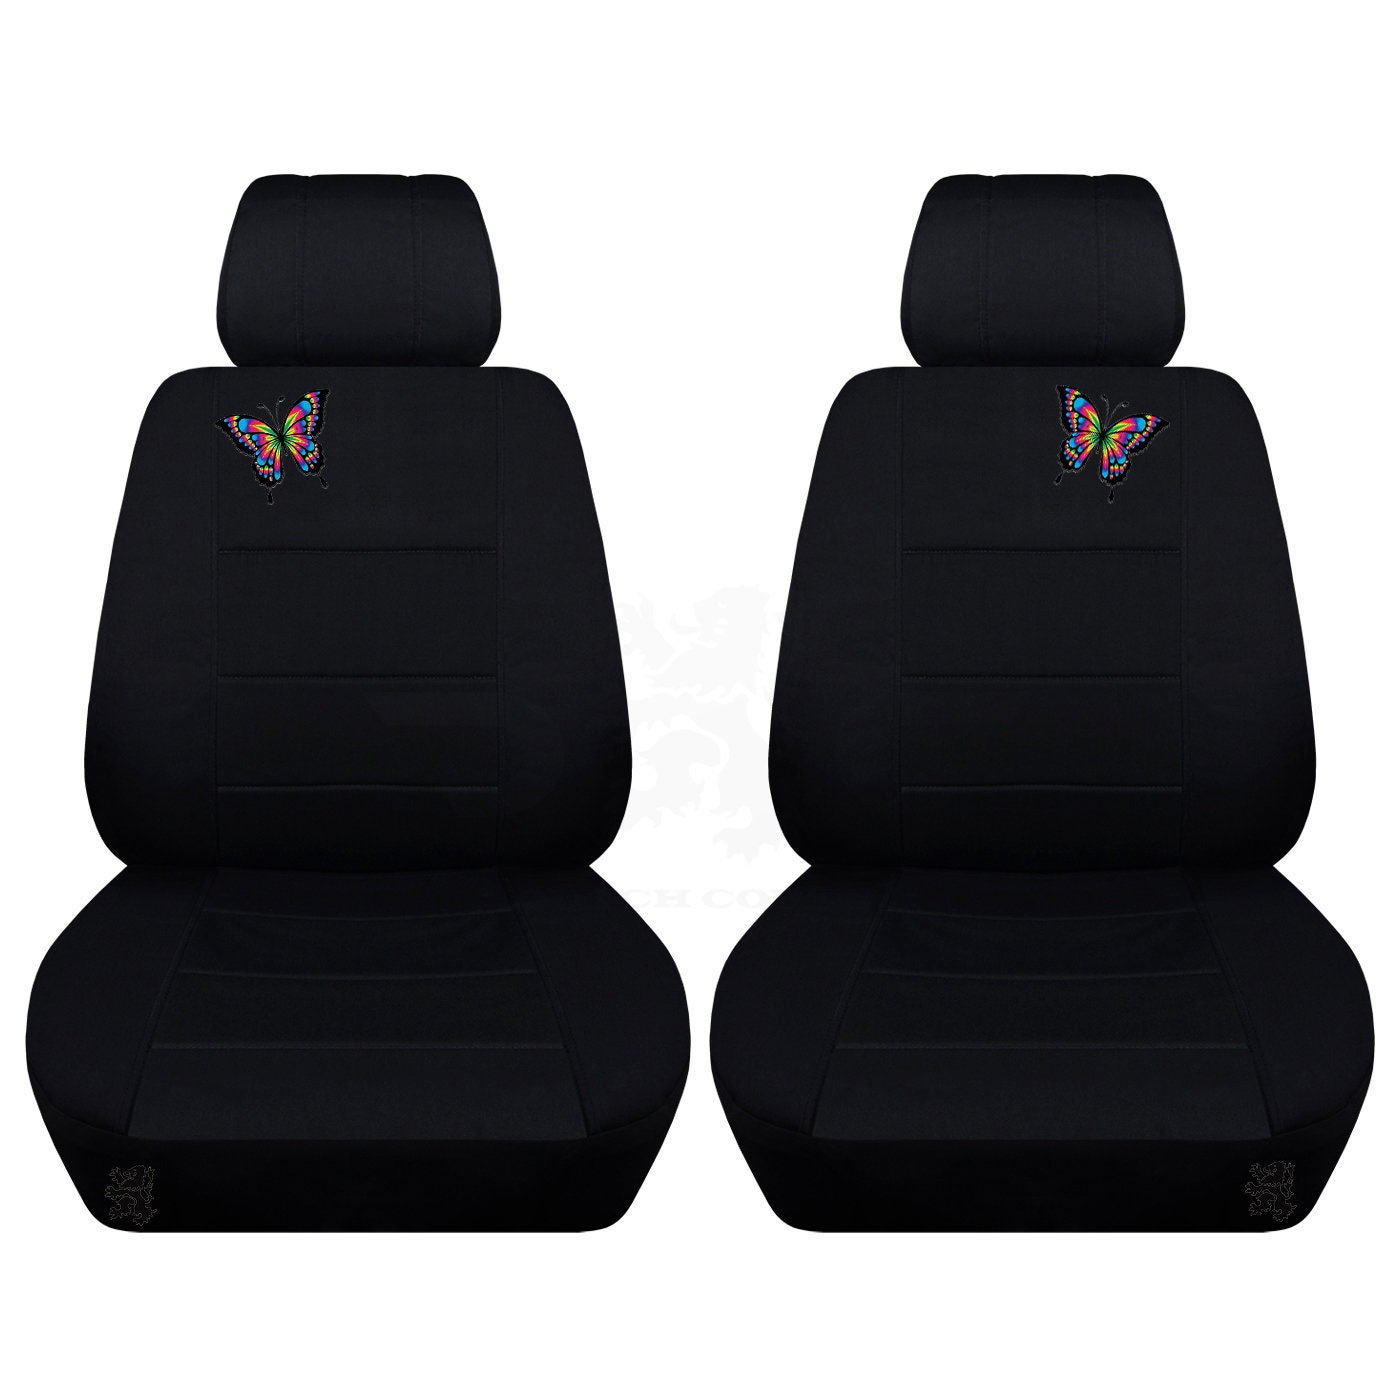 Two Front Seat Covers Fits a Toyota Corolla with a Butterfly | Etsy